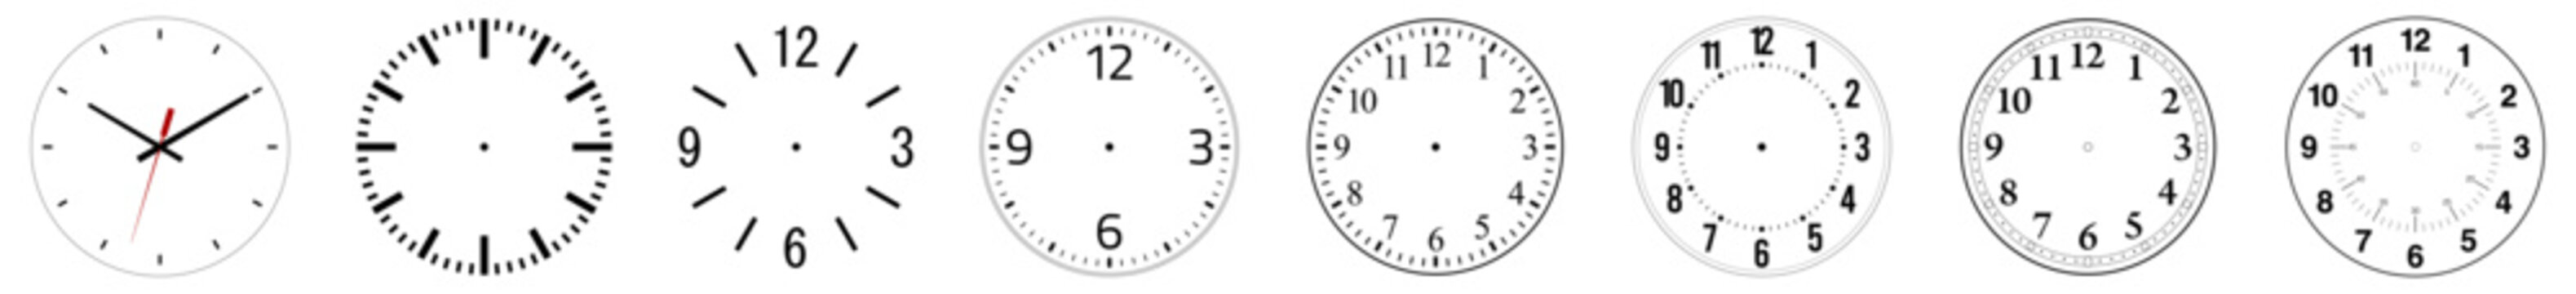 Simple analogue wall clock face, multiple versions